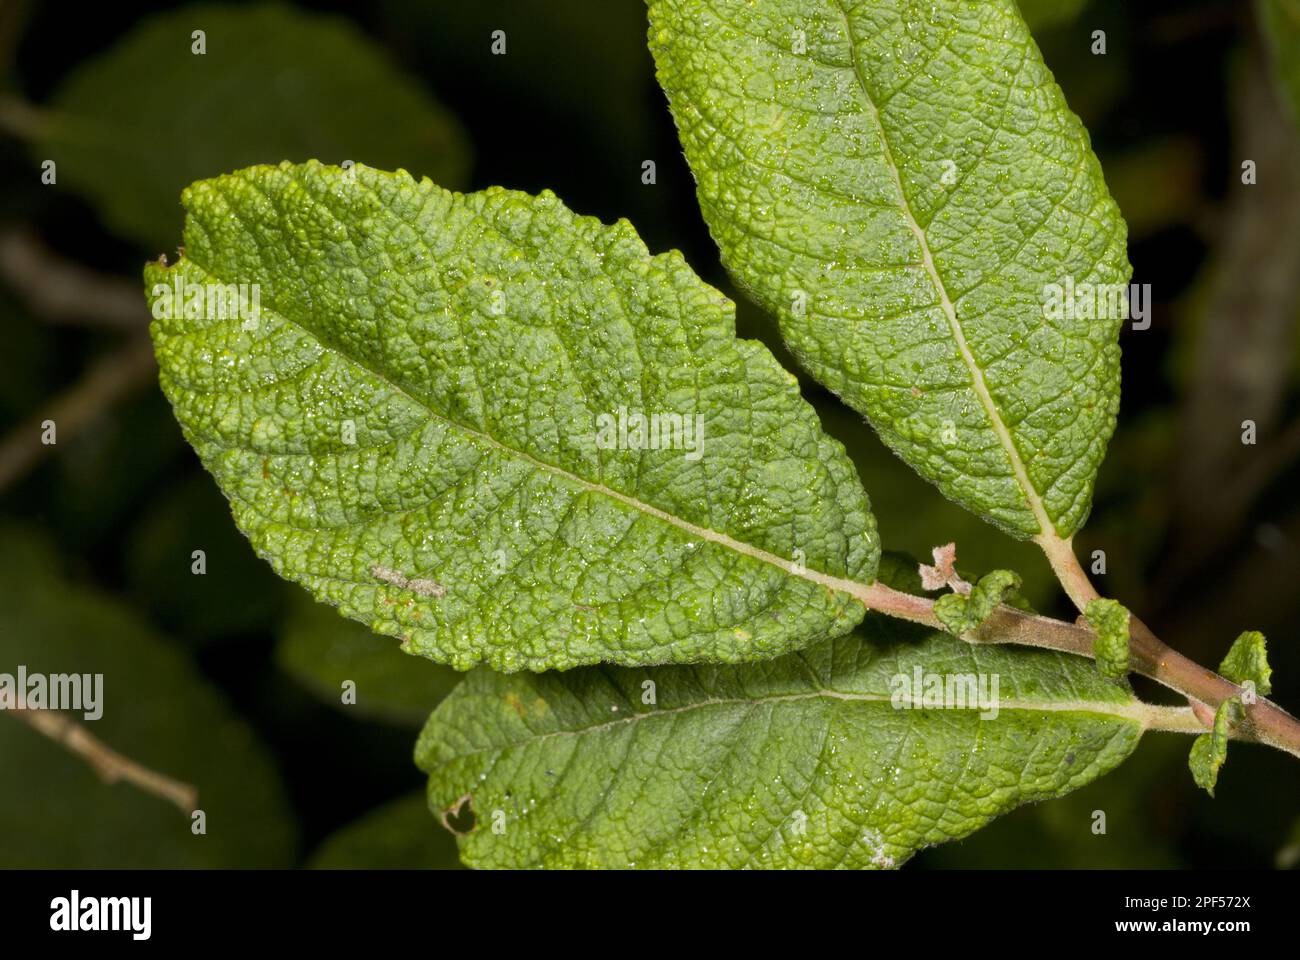 Eared willow (Salix aurita) close-up of wrinkled leaves and persistent stipules, Devon, England, United Kingdom Stock Photo